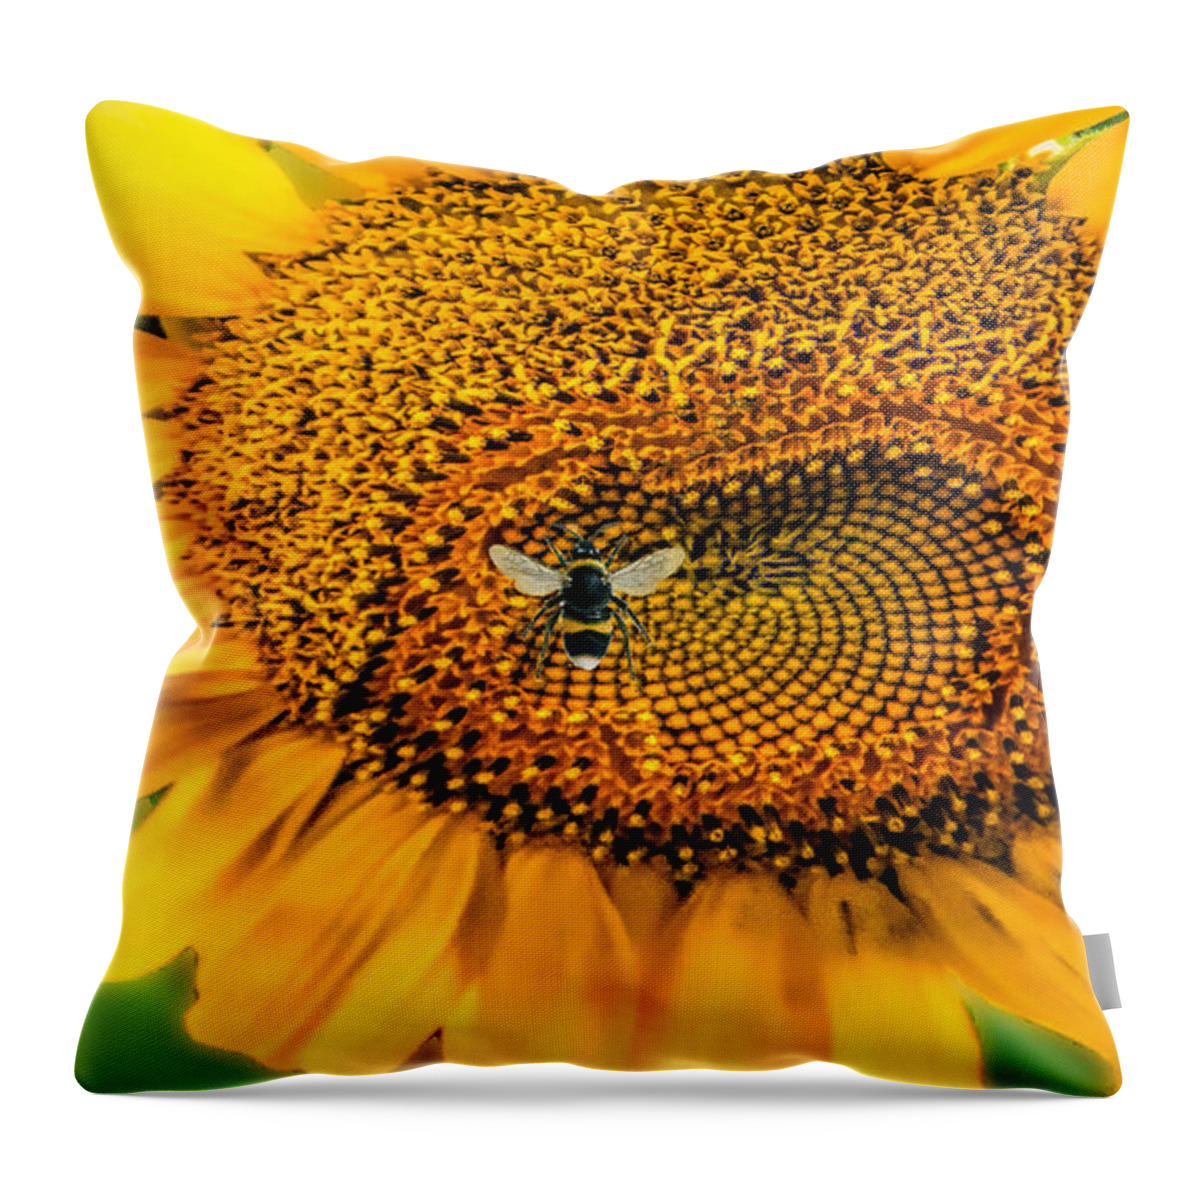 Sunflower Throw Pillow featuring the photograph Sunflower Patch by Pat Cook